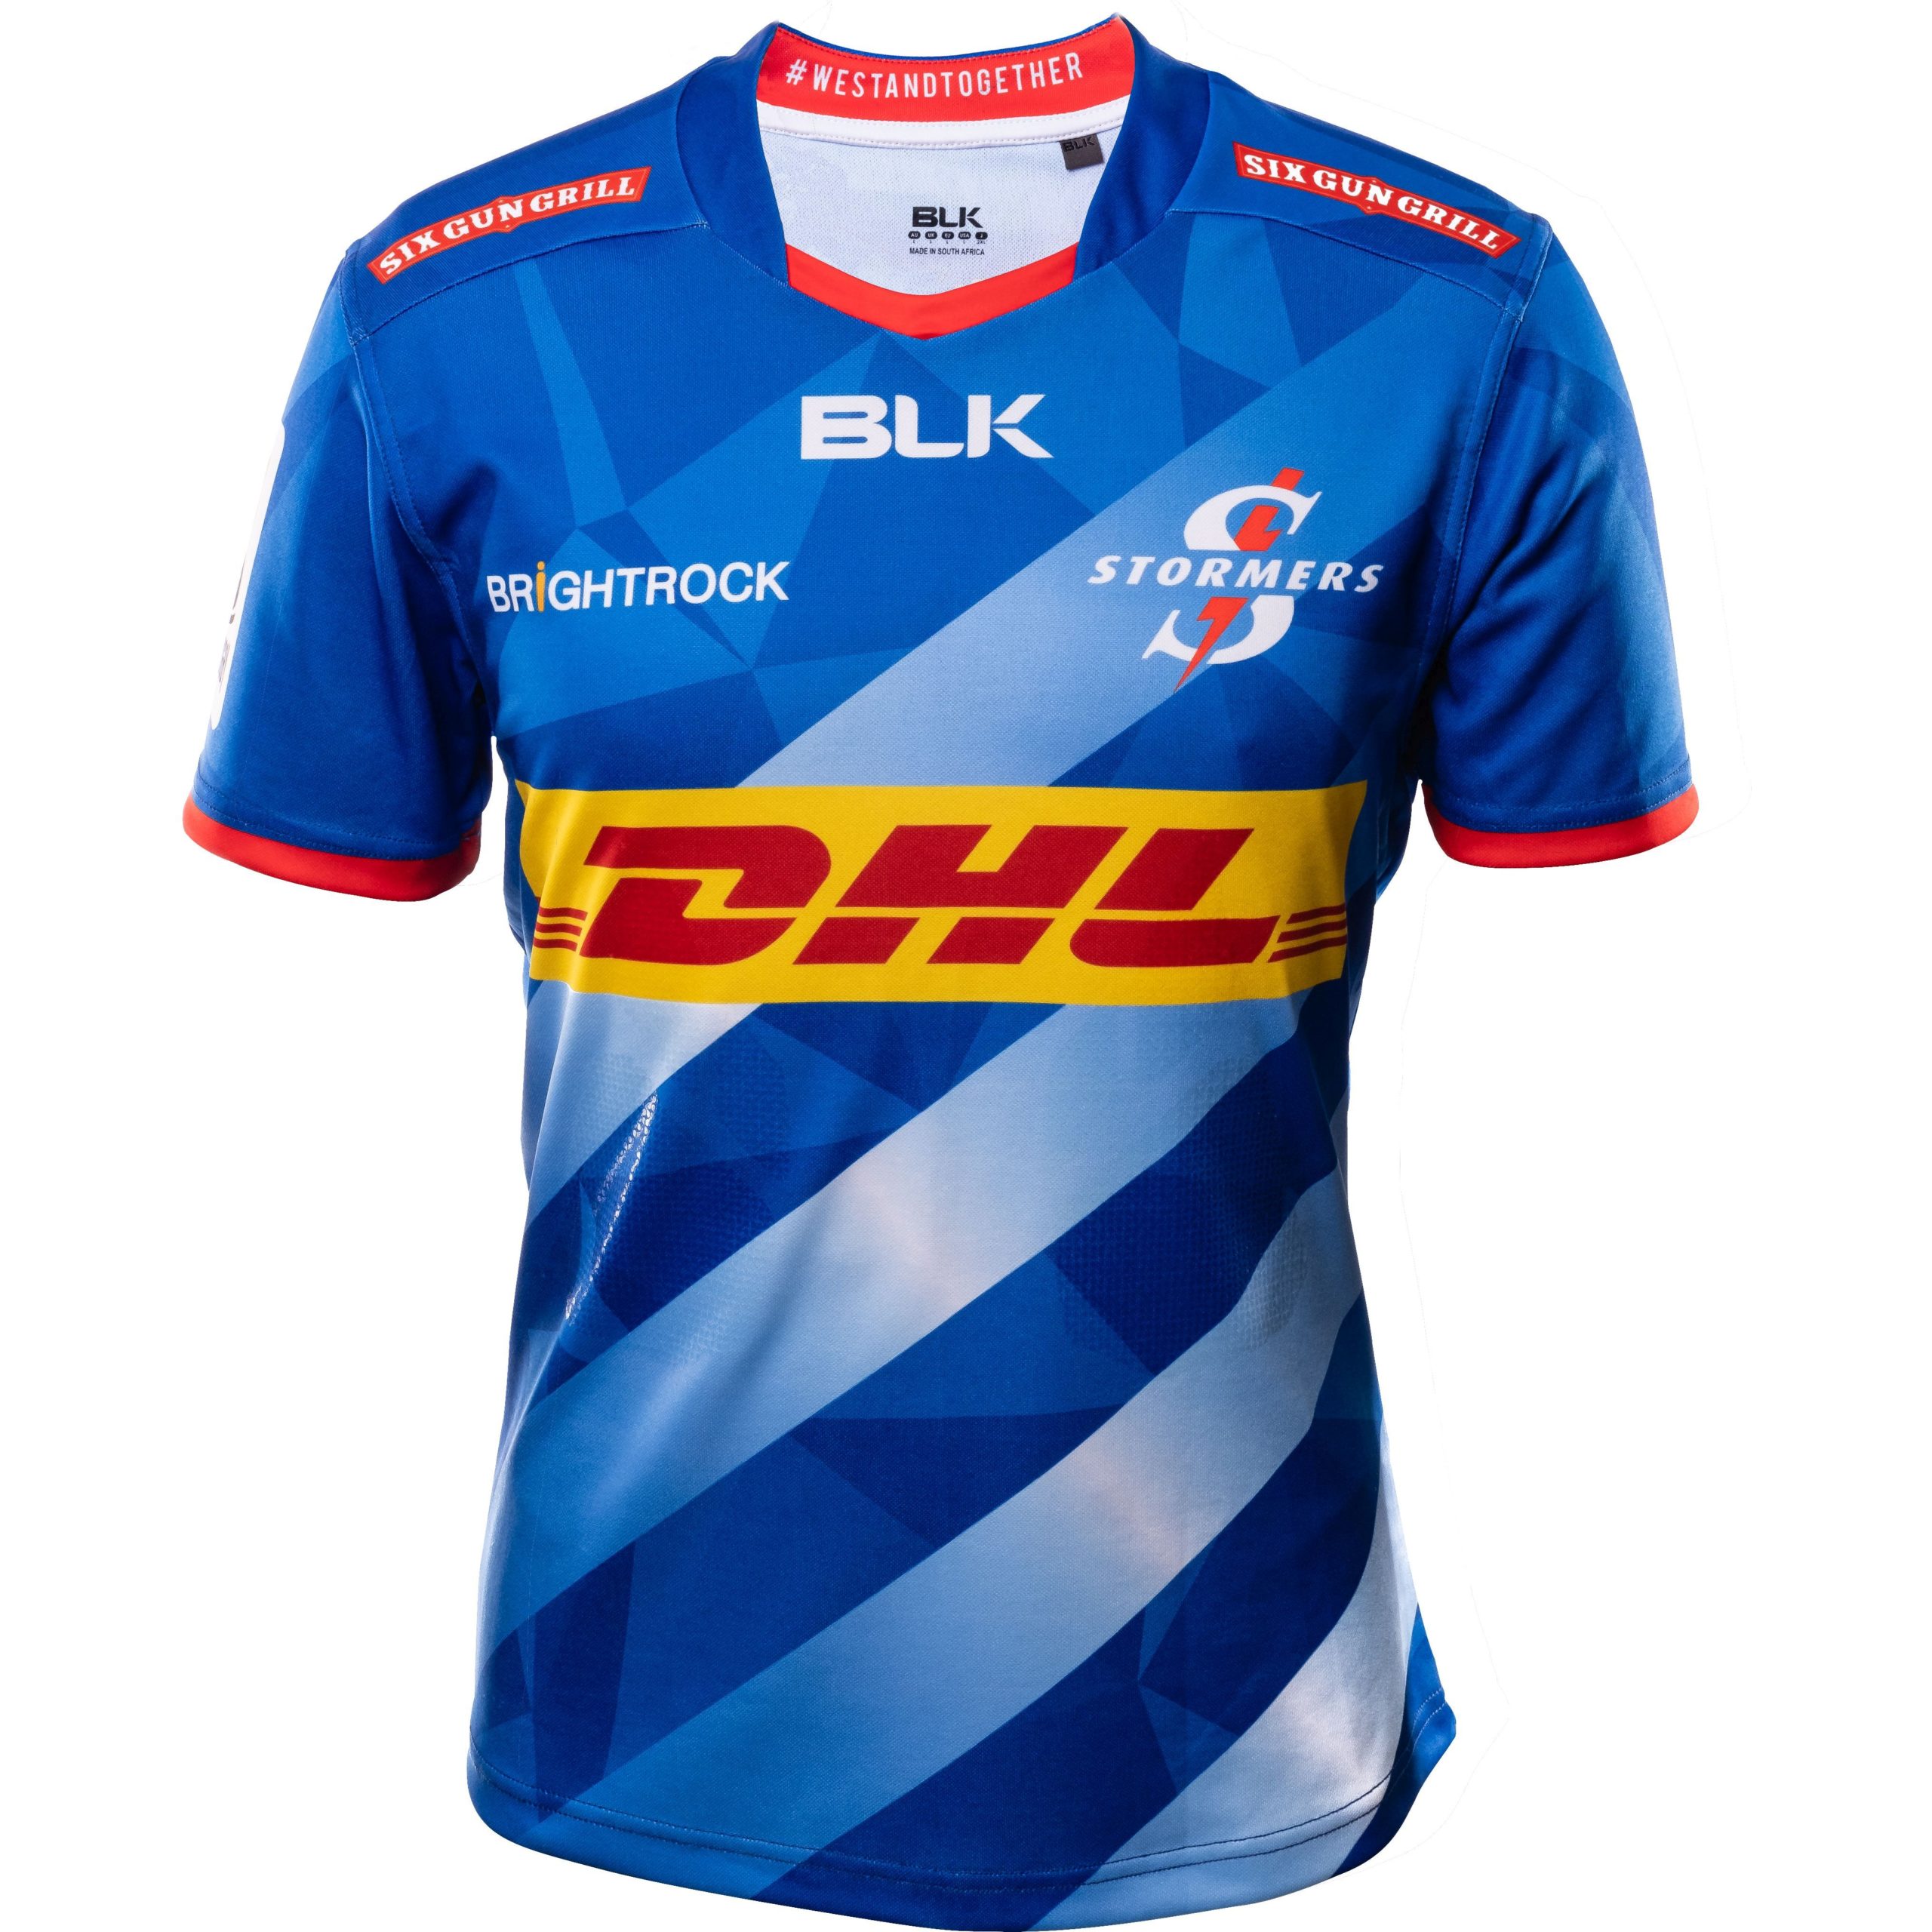 south african rugby jersey 2020